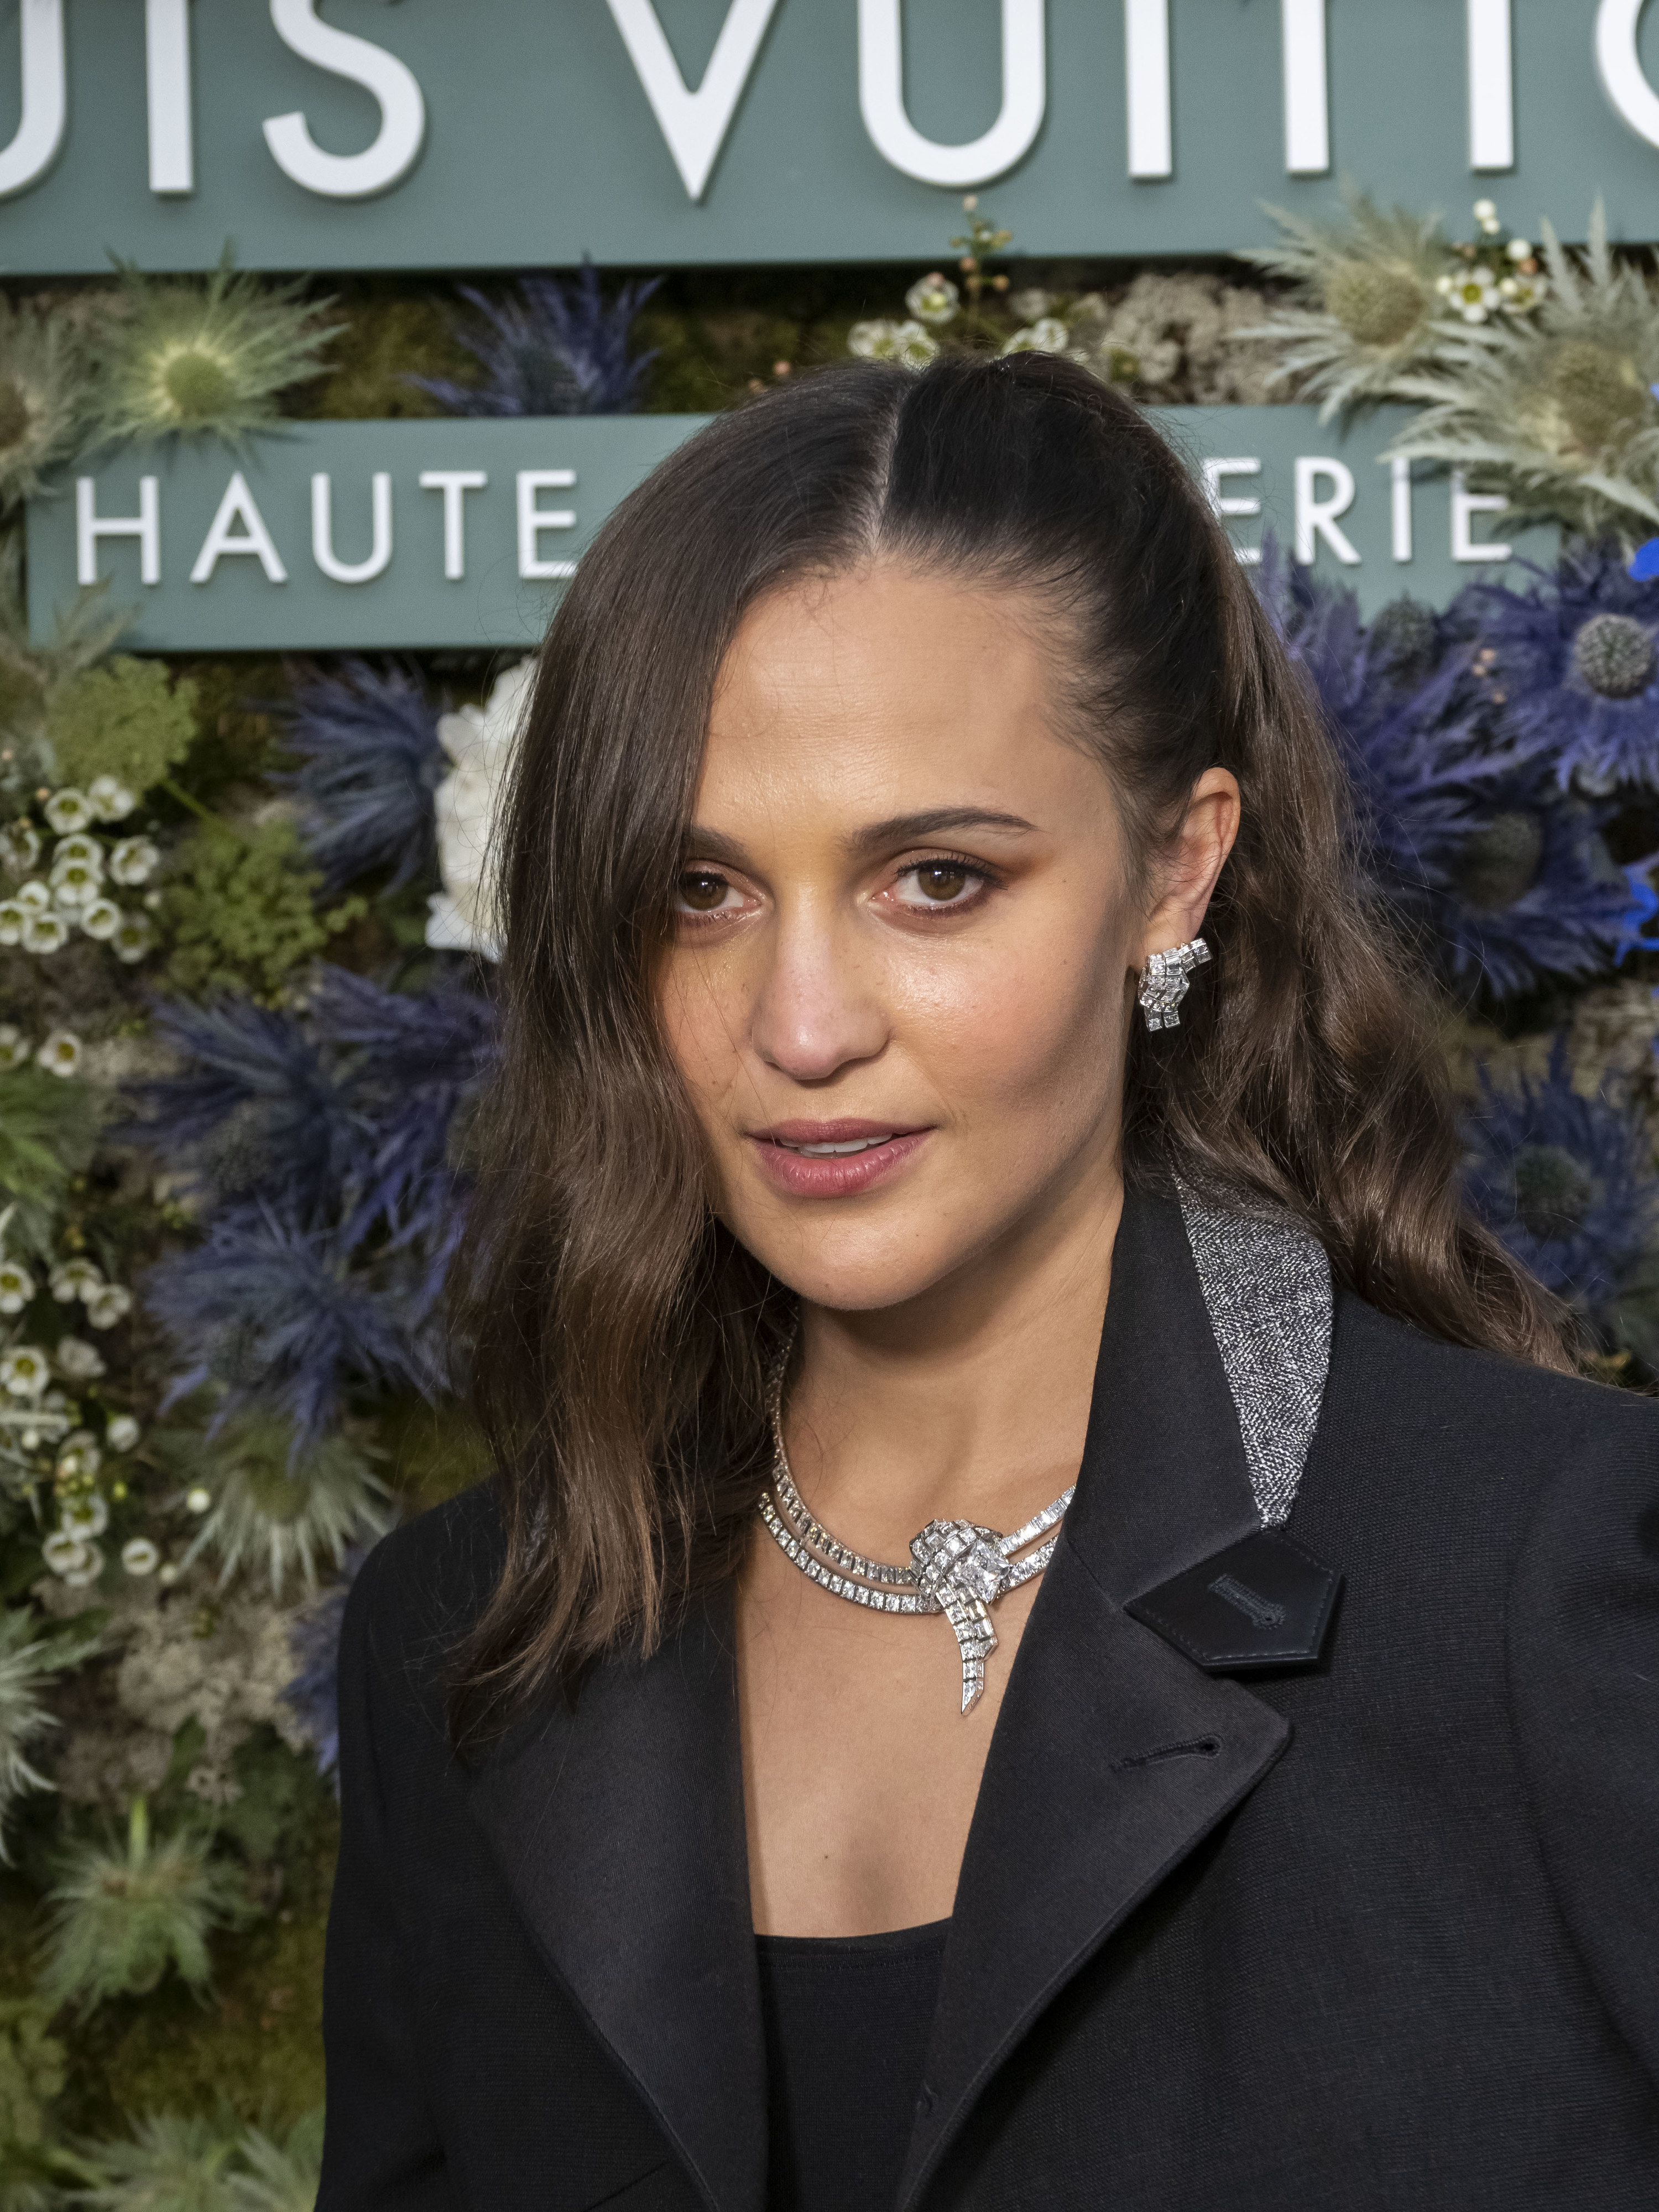 Alicia Vikander reveals she suffered miscarriage before welcoming